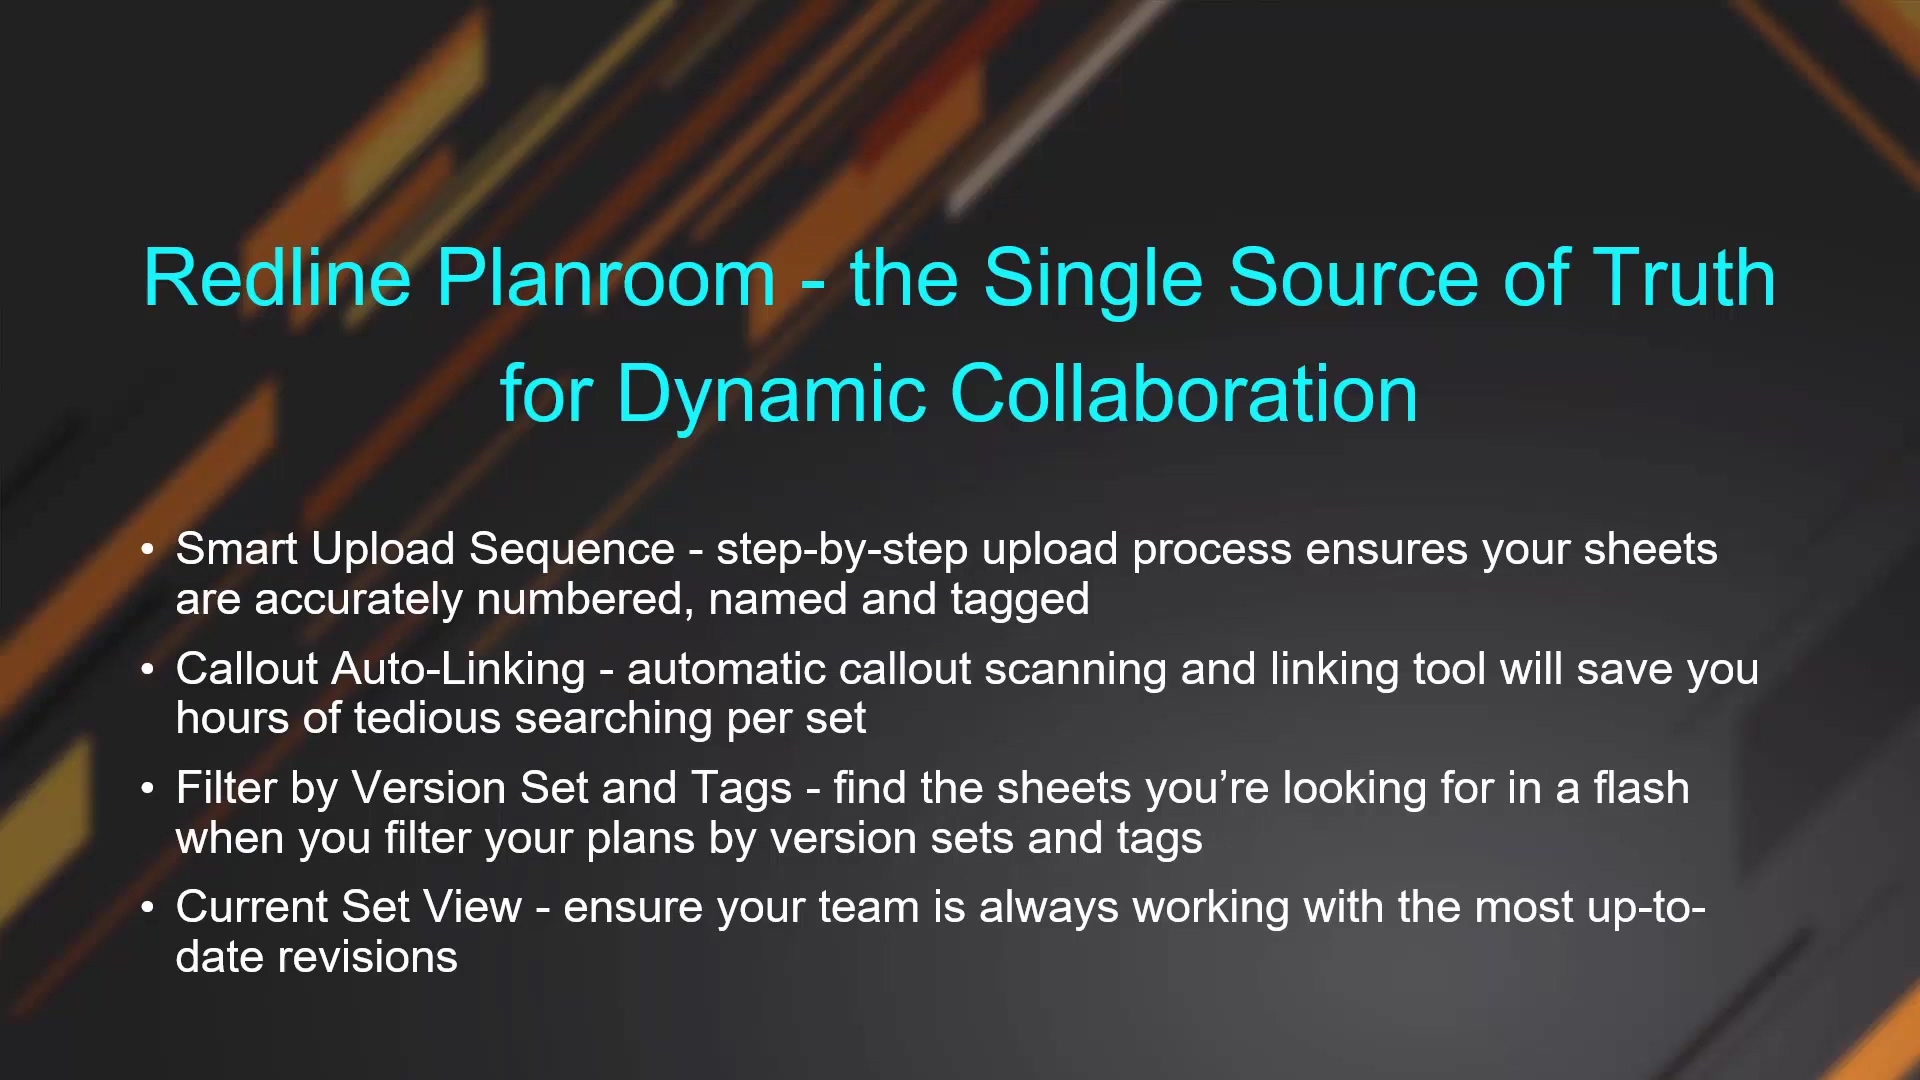 Redline Planroom - the Single Source of Truth for Dynamic Collaboration